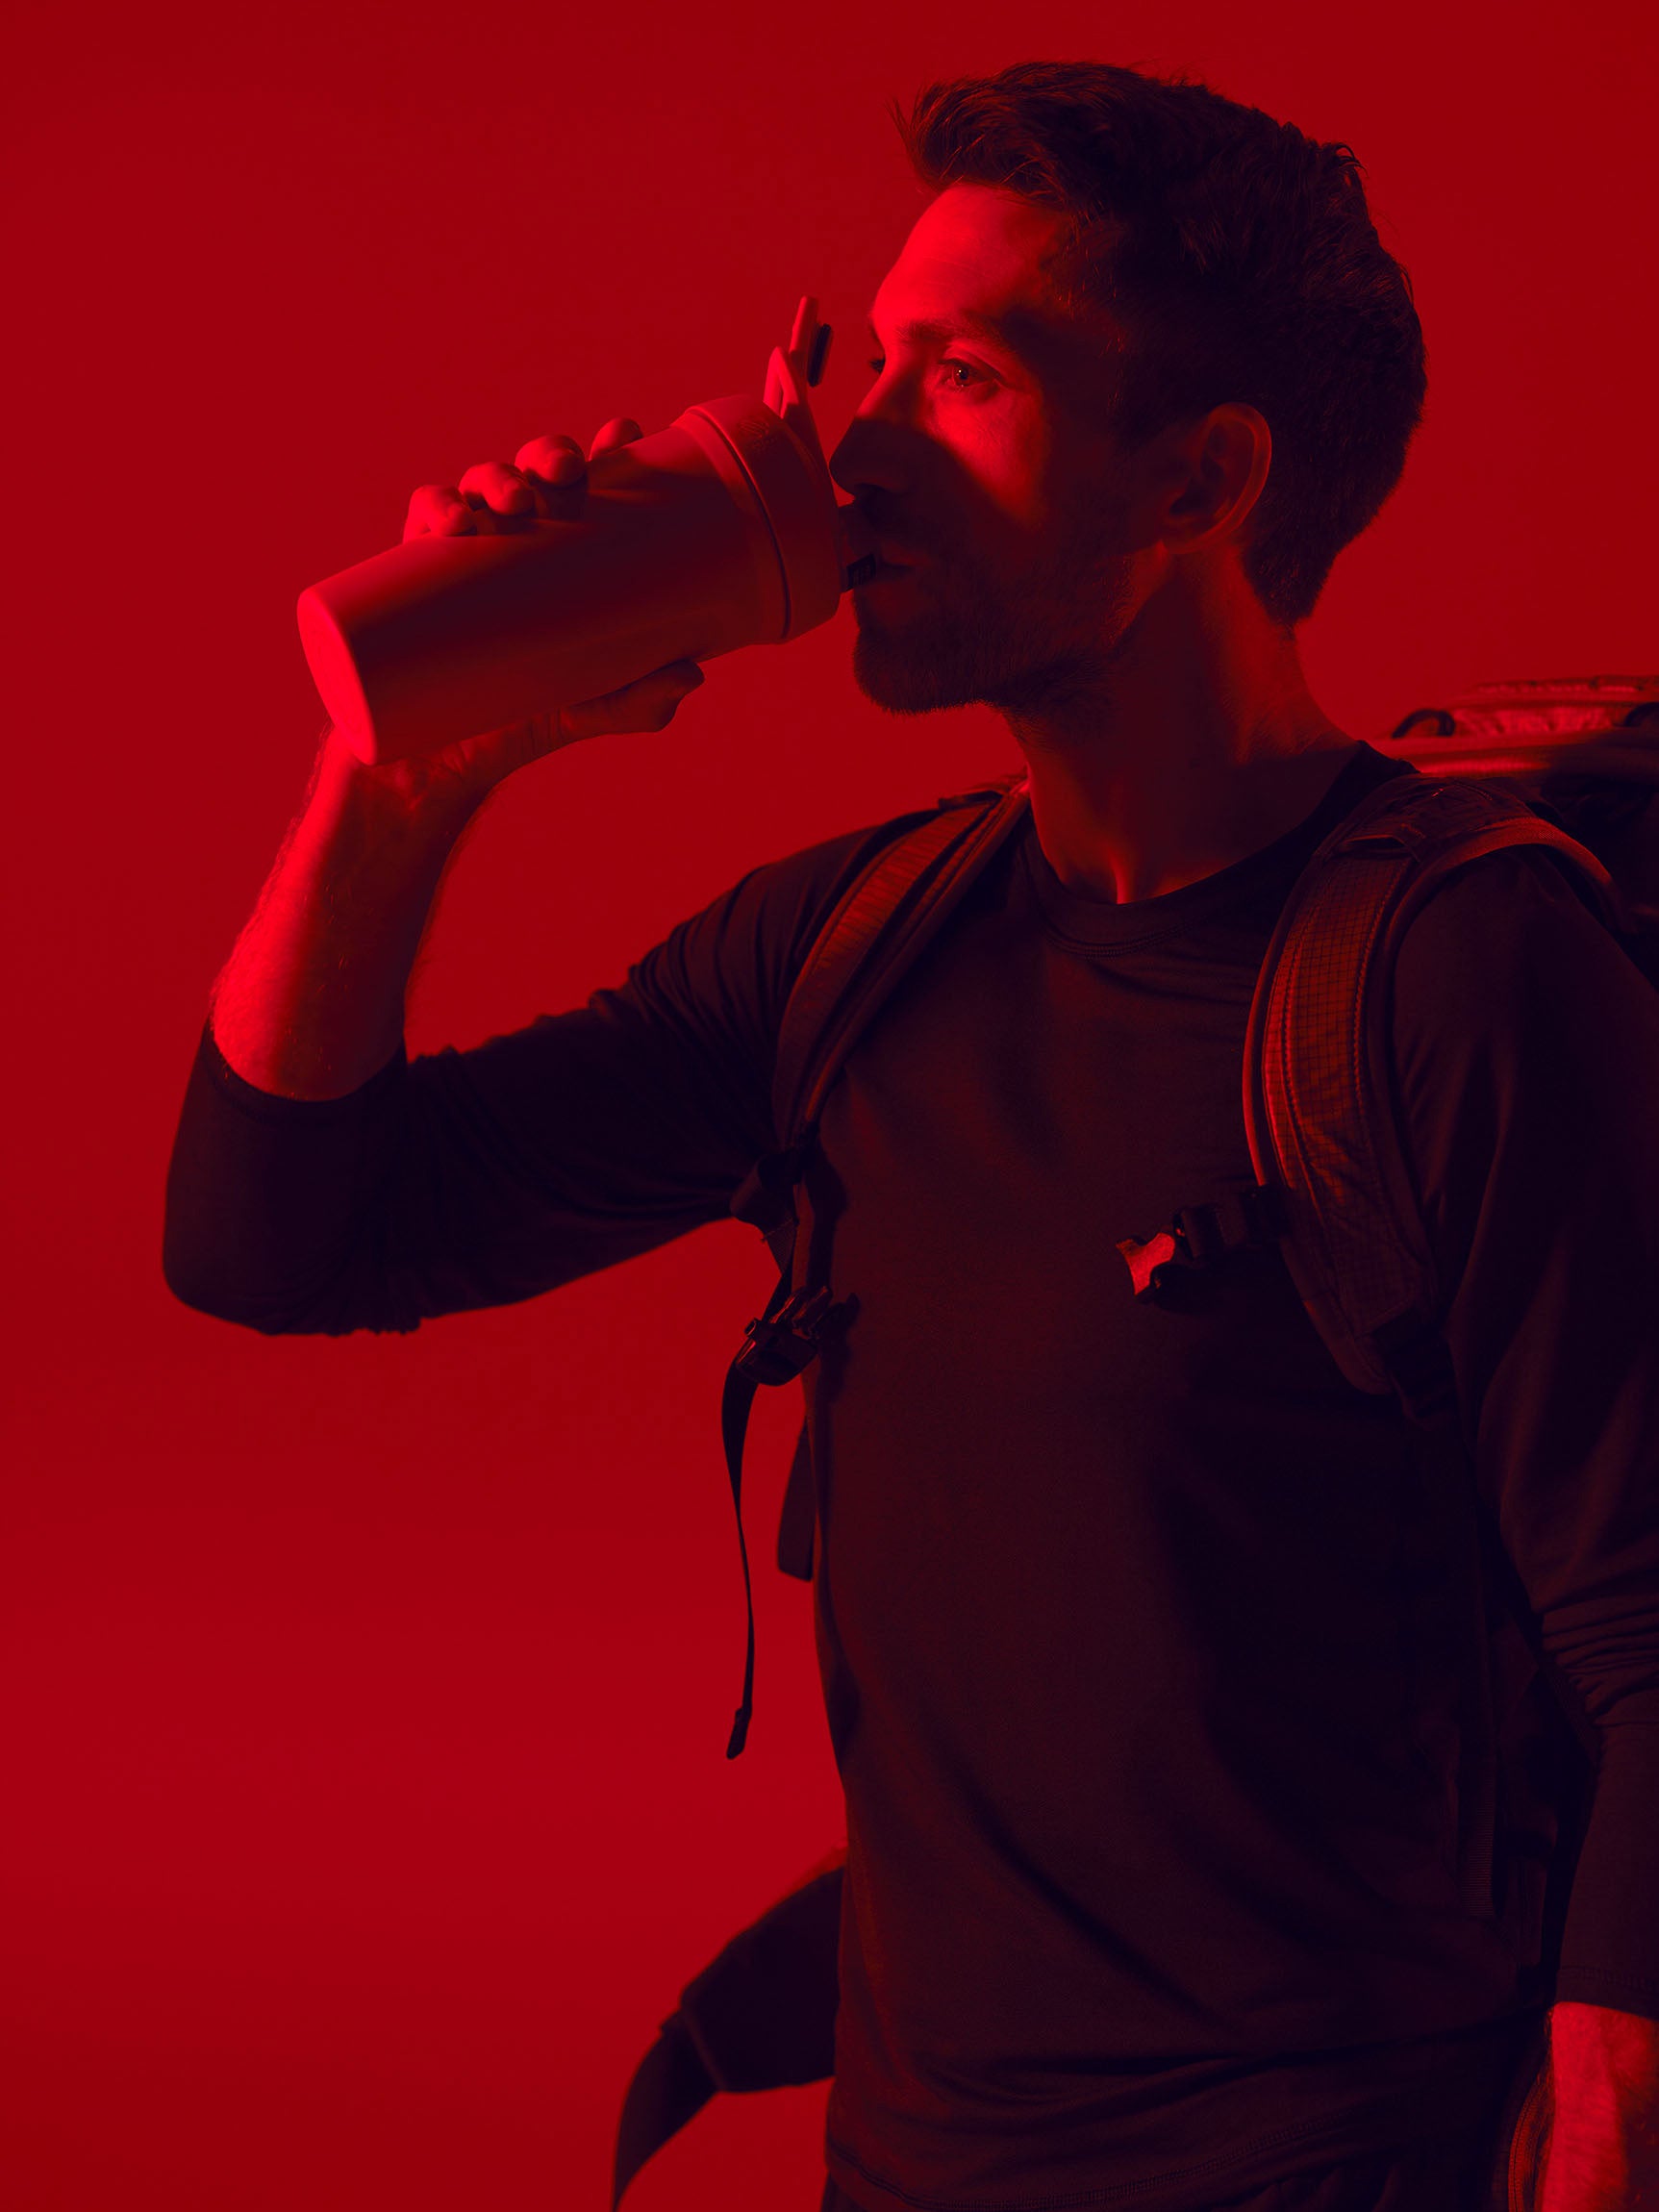 Man drinking protein shake from red shaker bottle